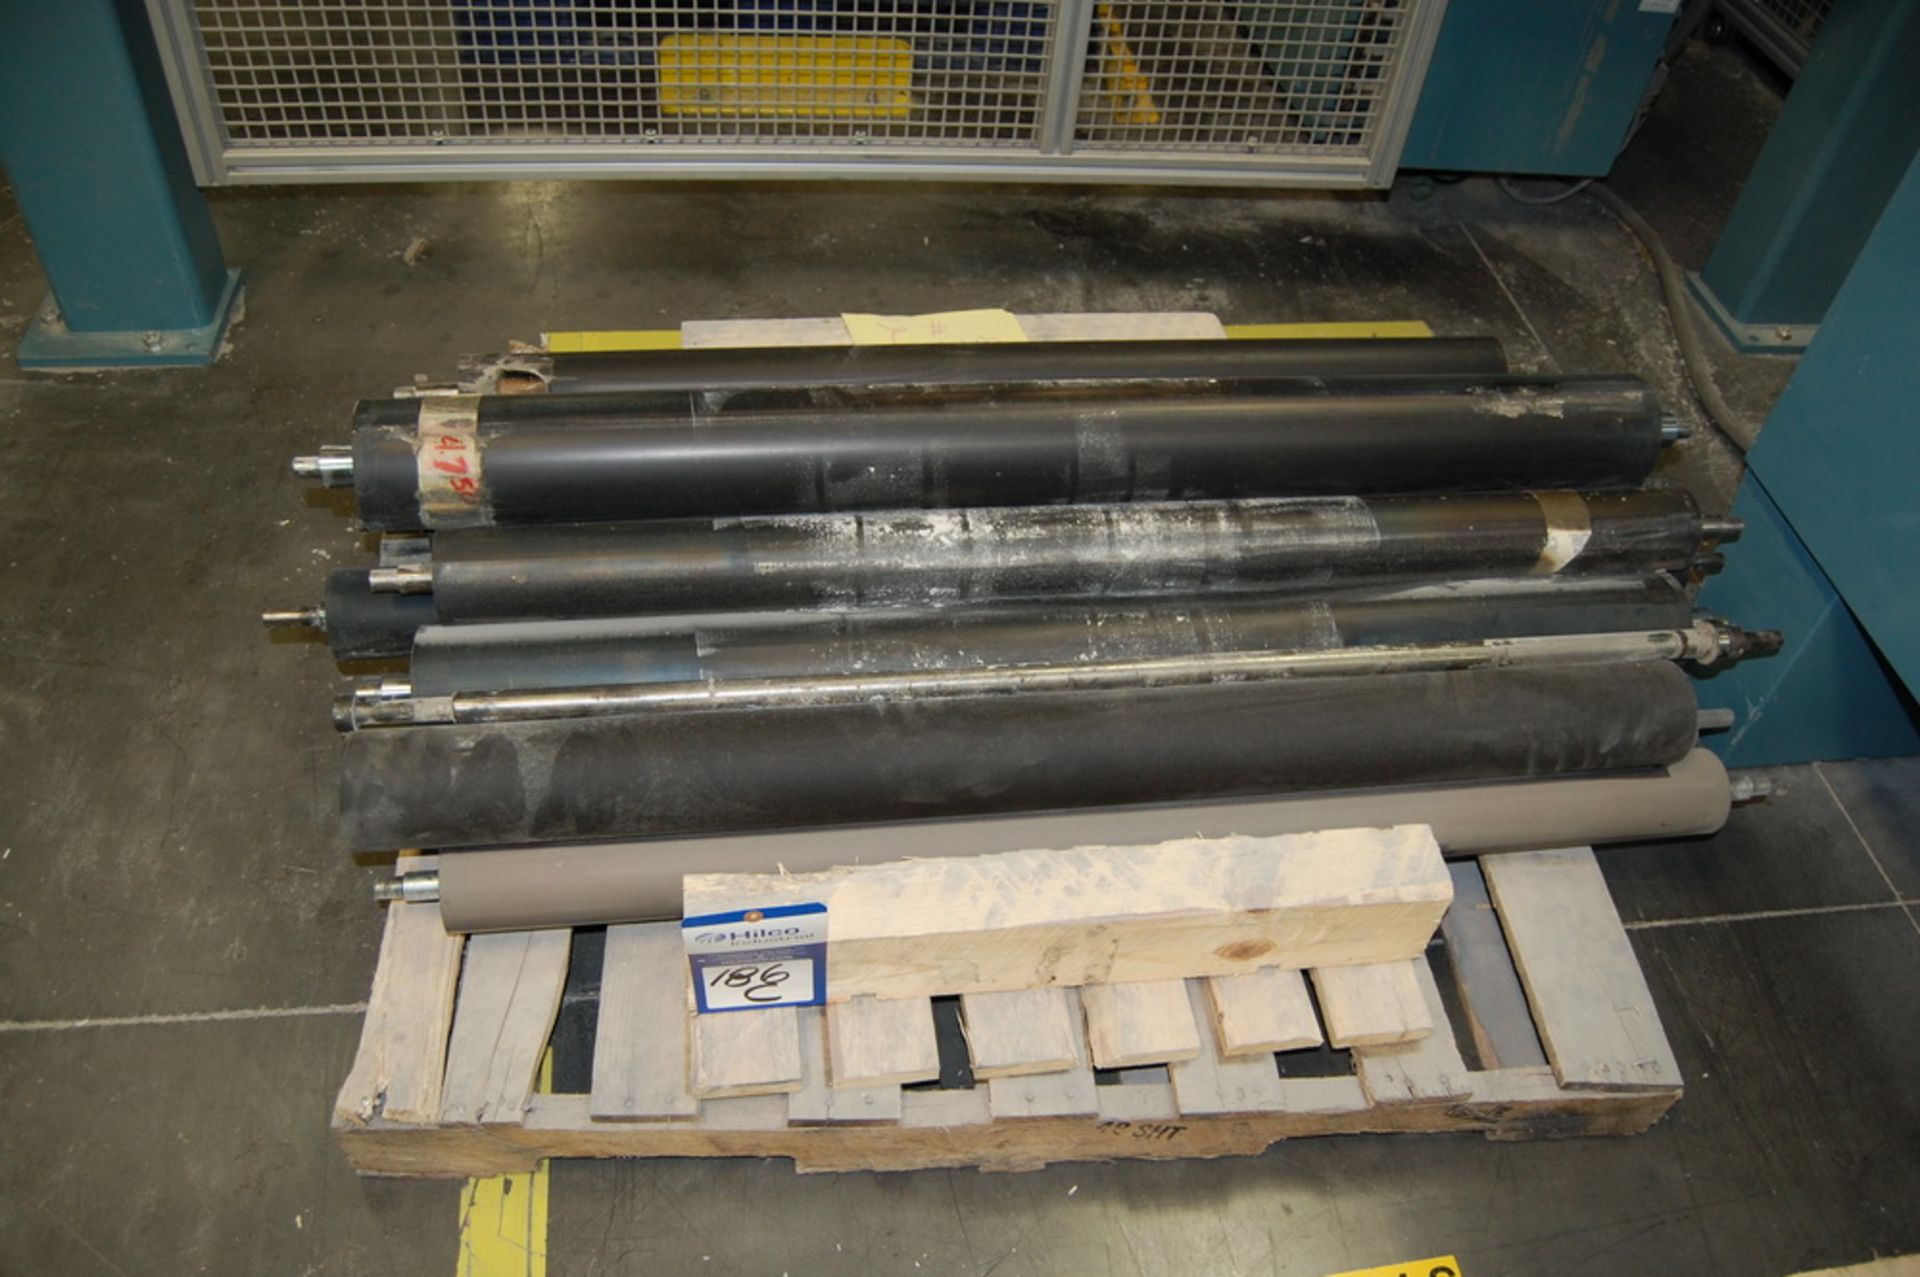 Pallet with Set of Timson Rubber Inking Rollers